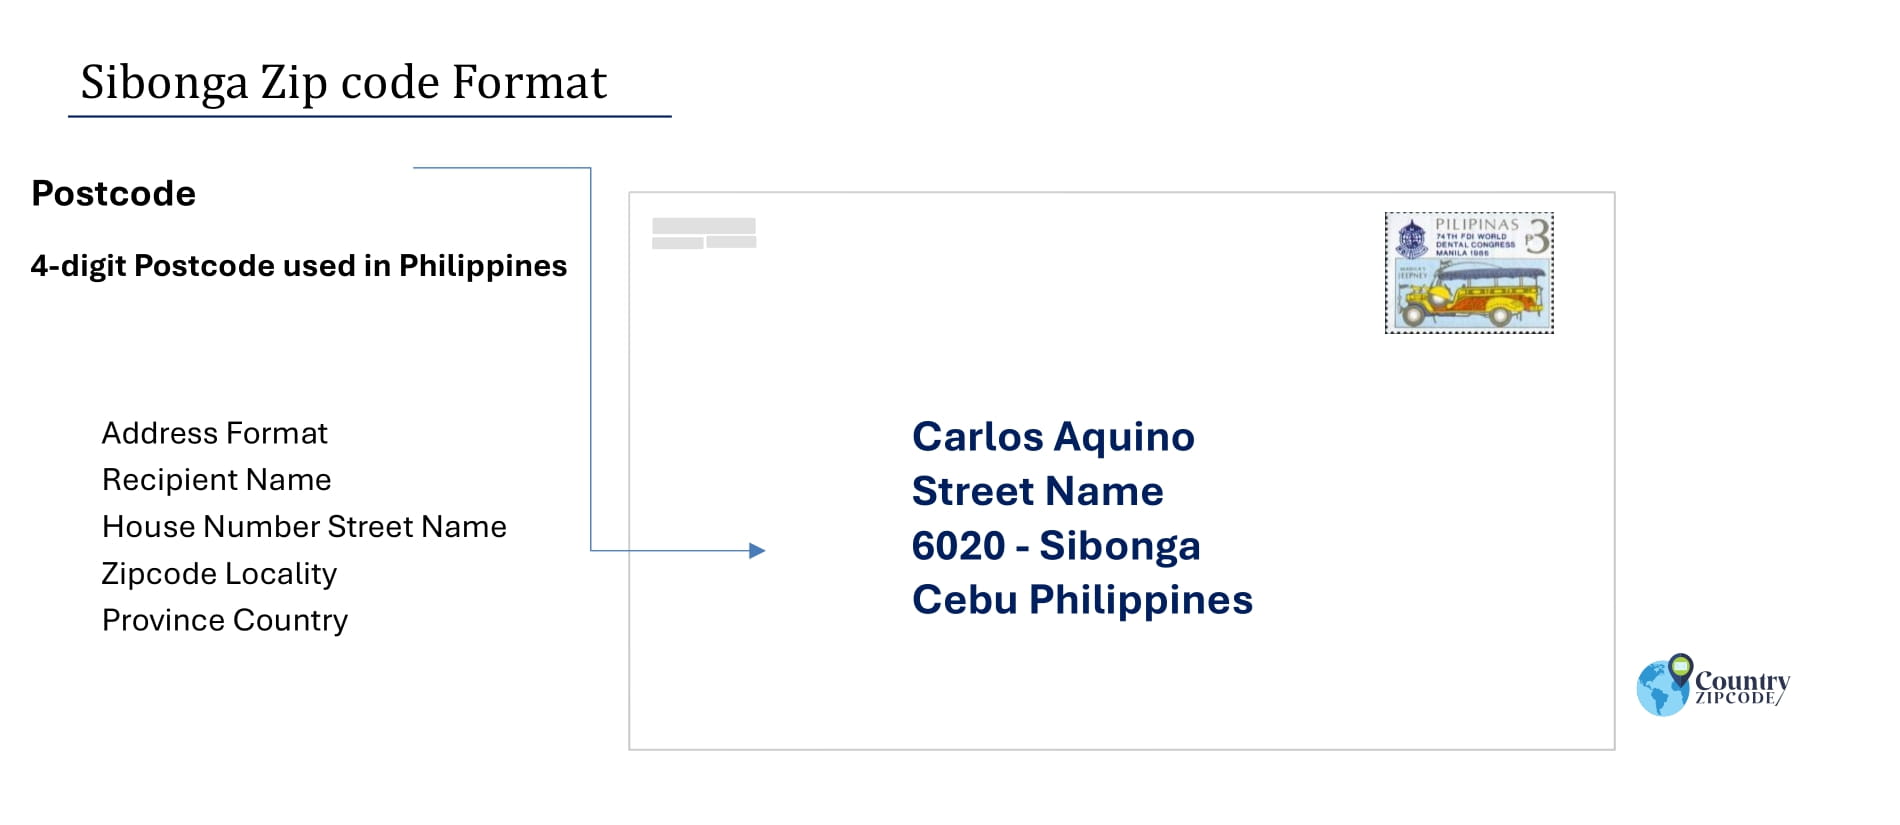 example of Sibonga Philippines zip code and address format